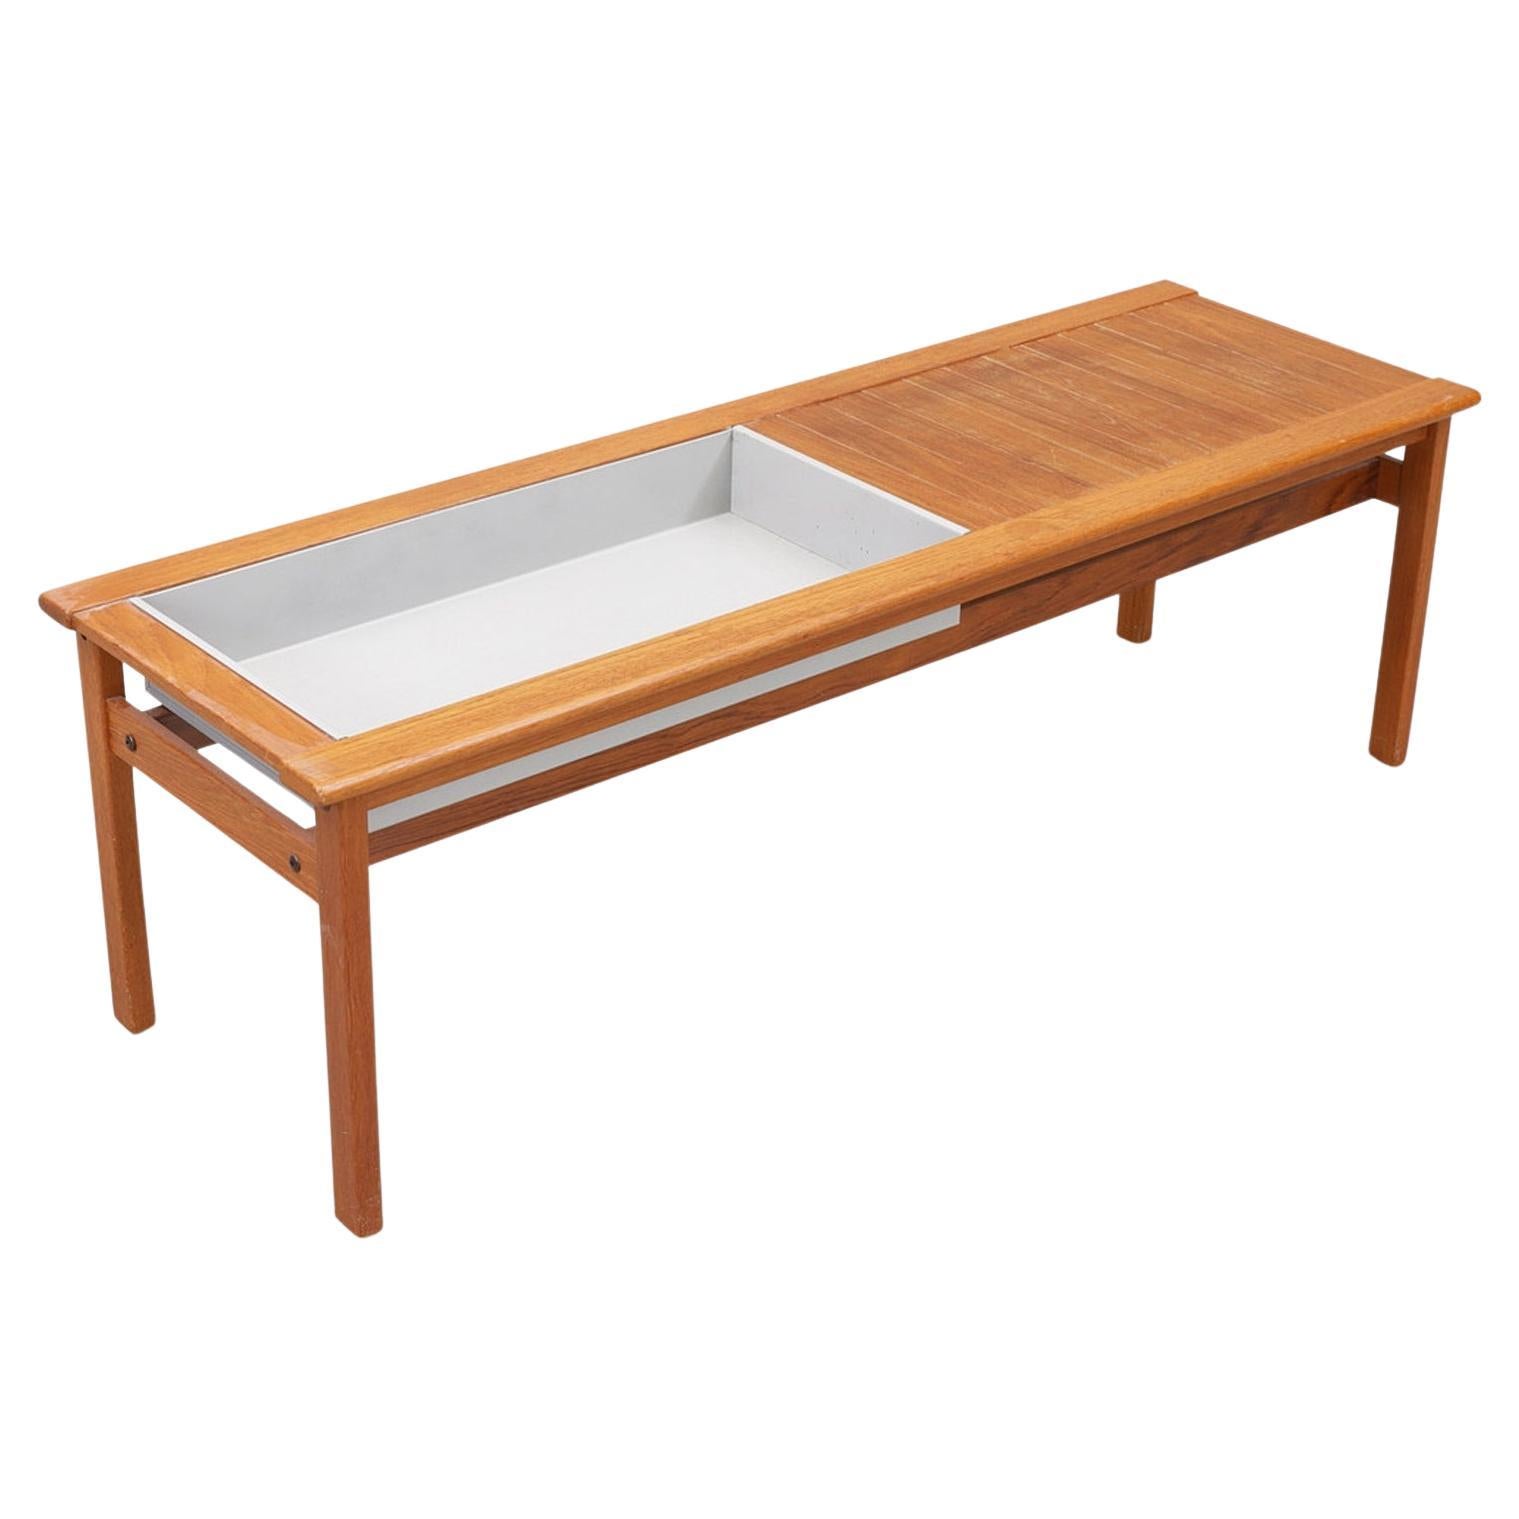 Florida Model Coffee Table / Planter in Teak by Ingvar Andersson